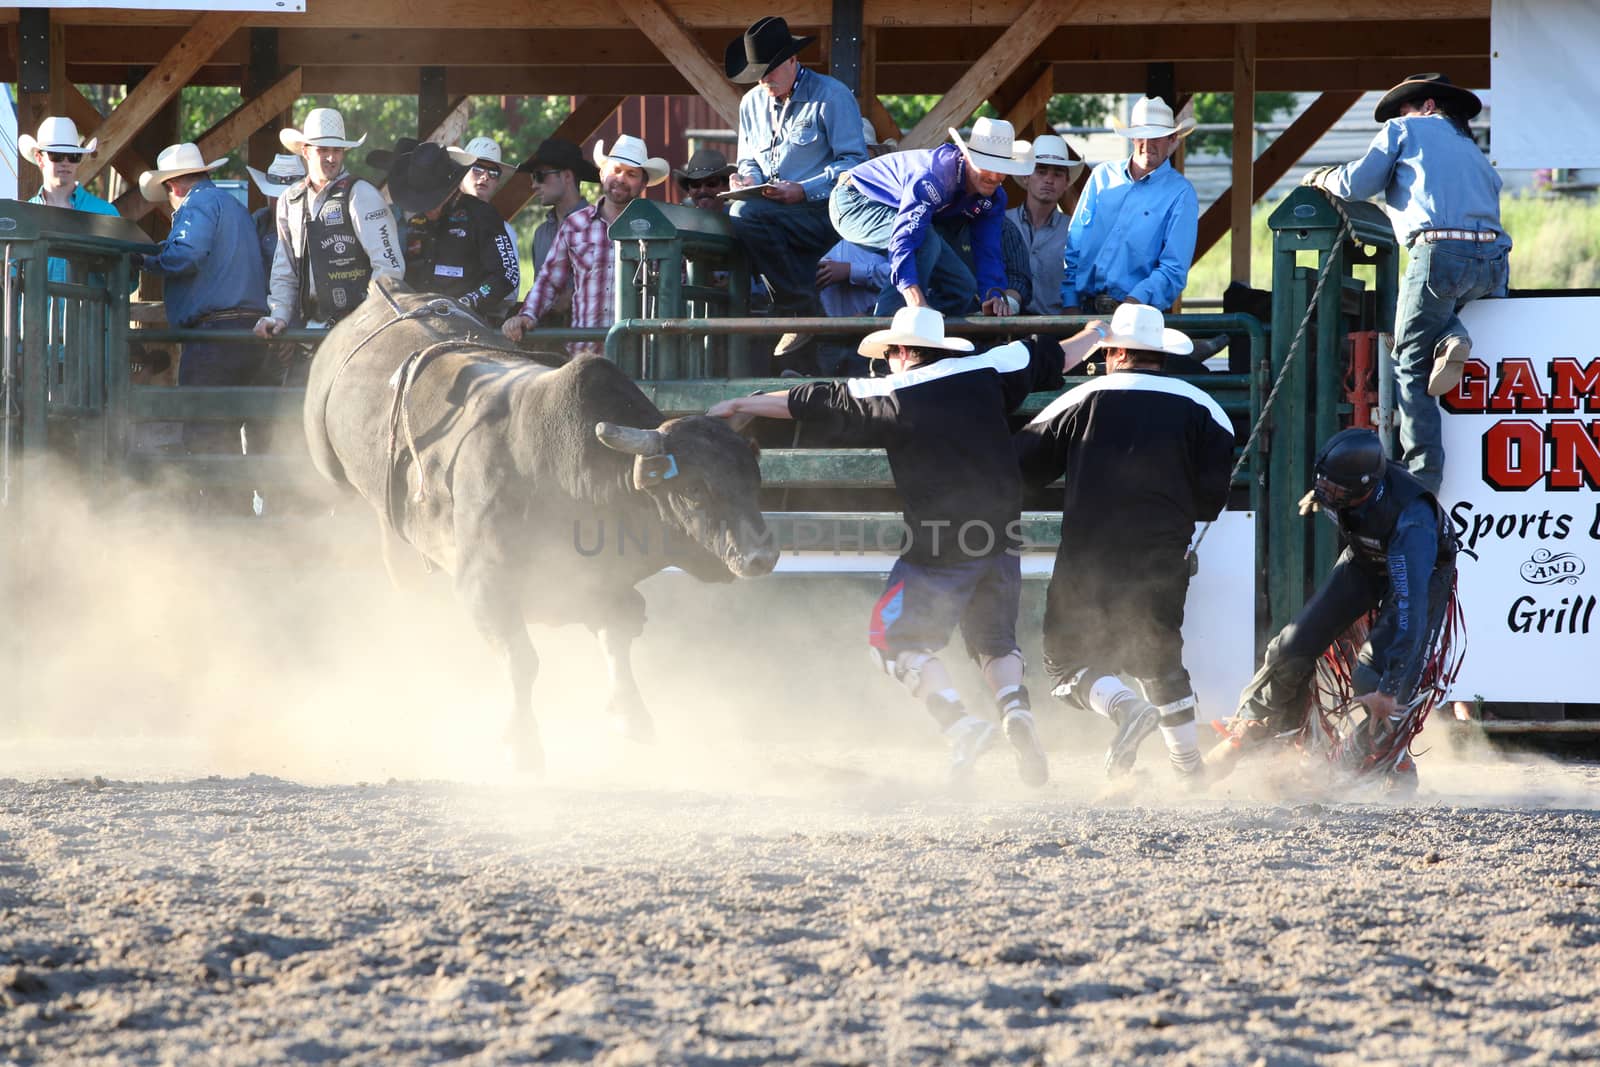 MERRITT, B.C. CANADA - May 30, 2015: Bull rider riding in the final round of The 3rd Annual Ty Pozzobon Invitational PBR Event.